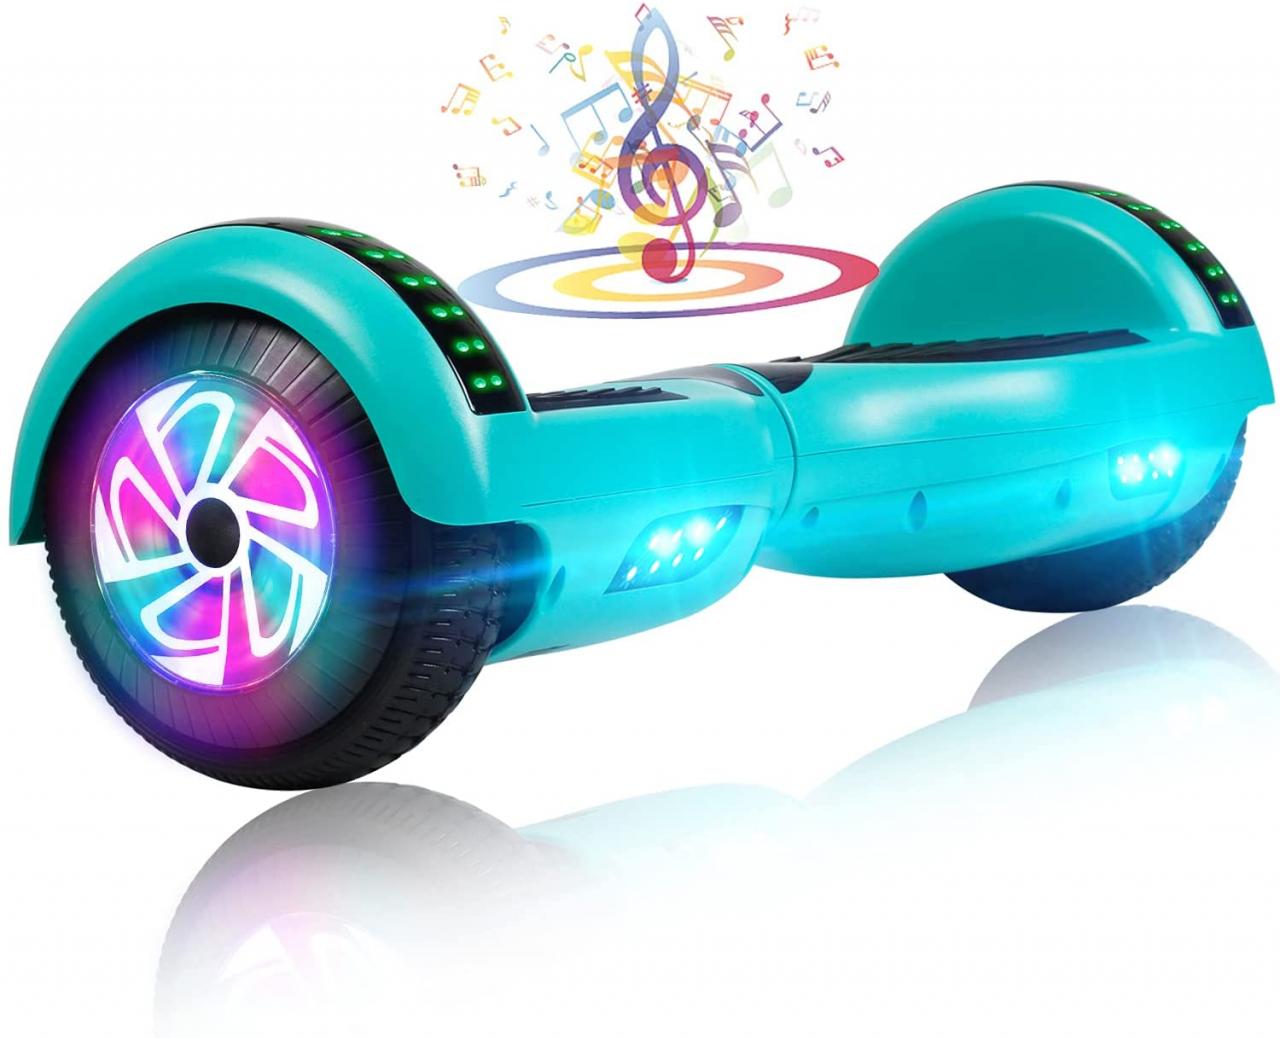 Buy UNI-SUN Hoverboard for Kids, 6.5 Two Wheel Self Balancing Hoverboards  with Bluetooth and Lights Online in Vietnam. B08G1N4WFR